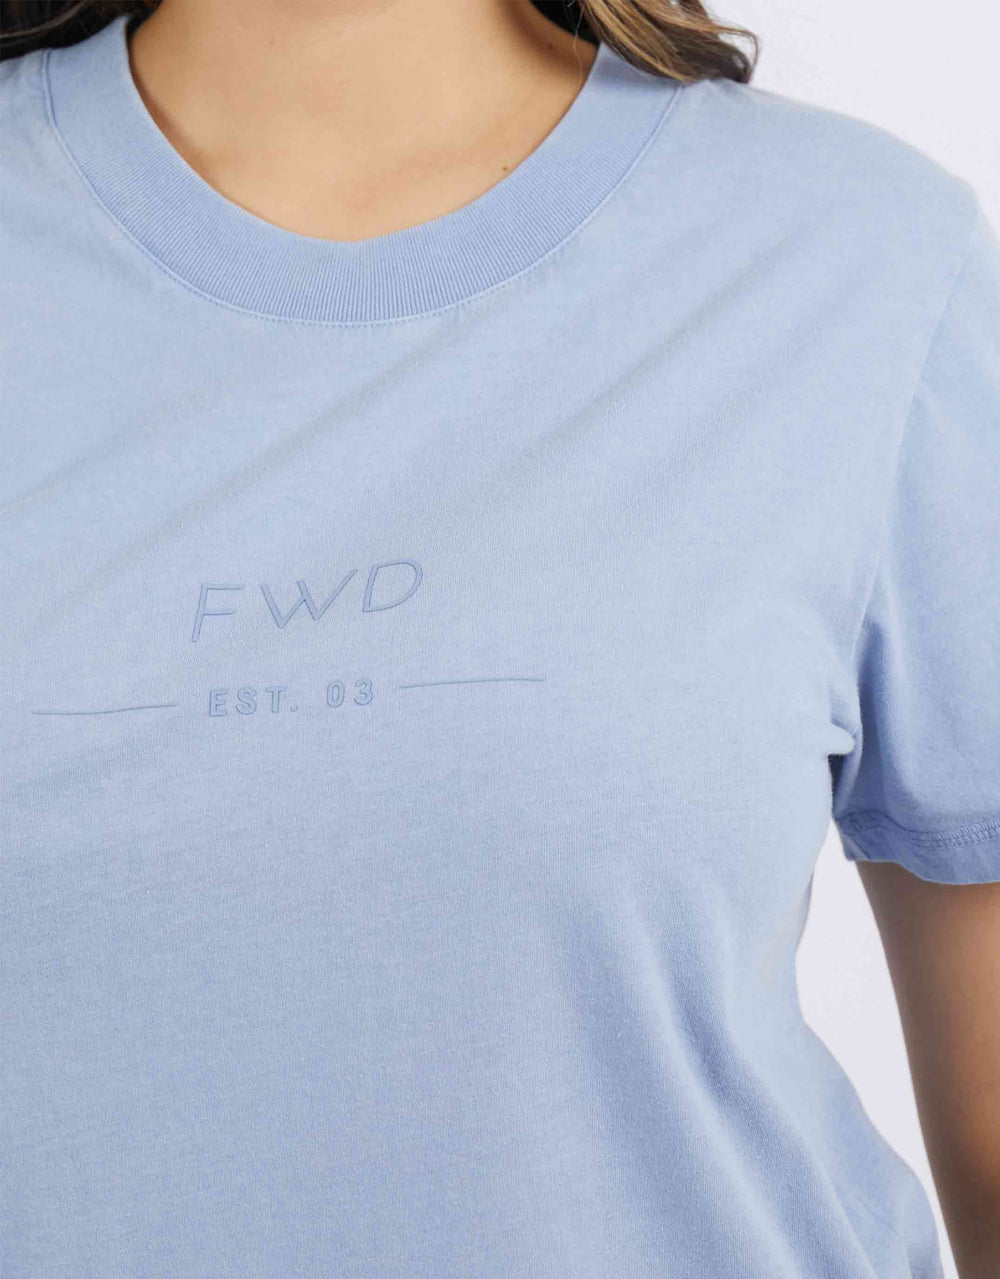 foxwood-fly-tee-light-blue-womens-clothing